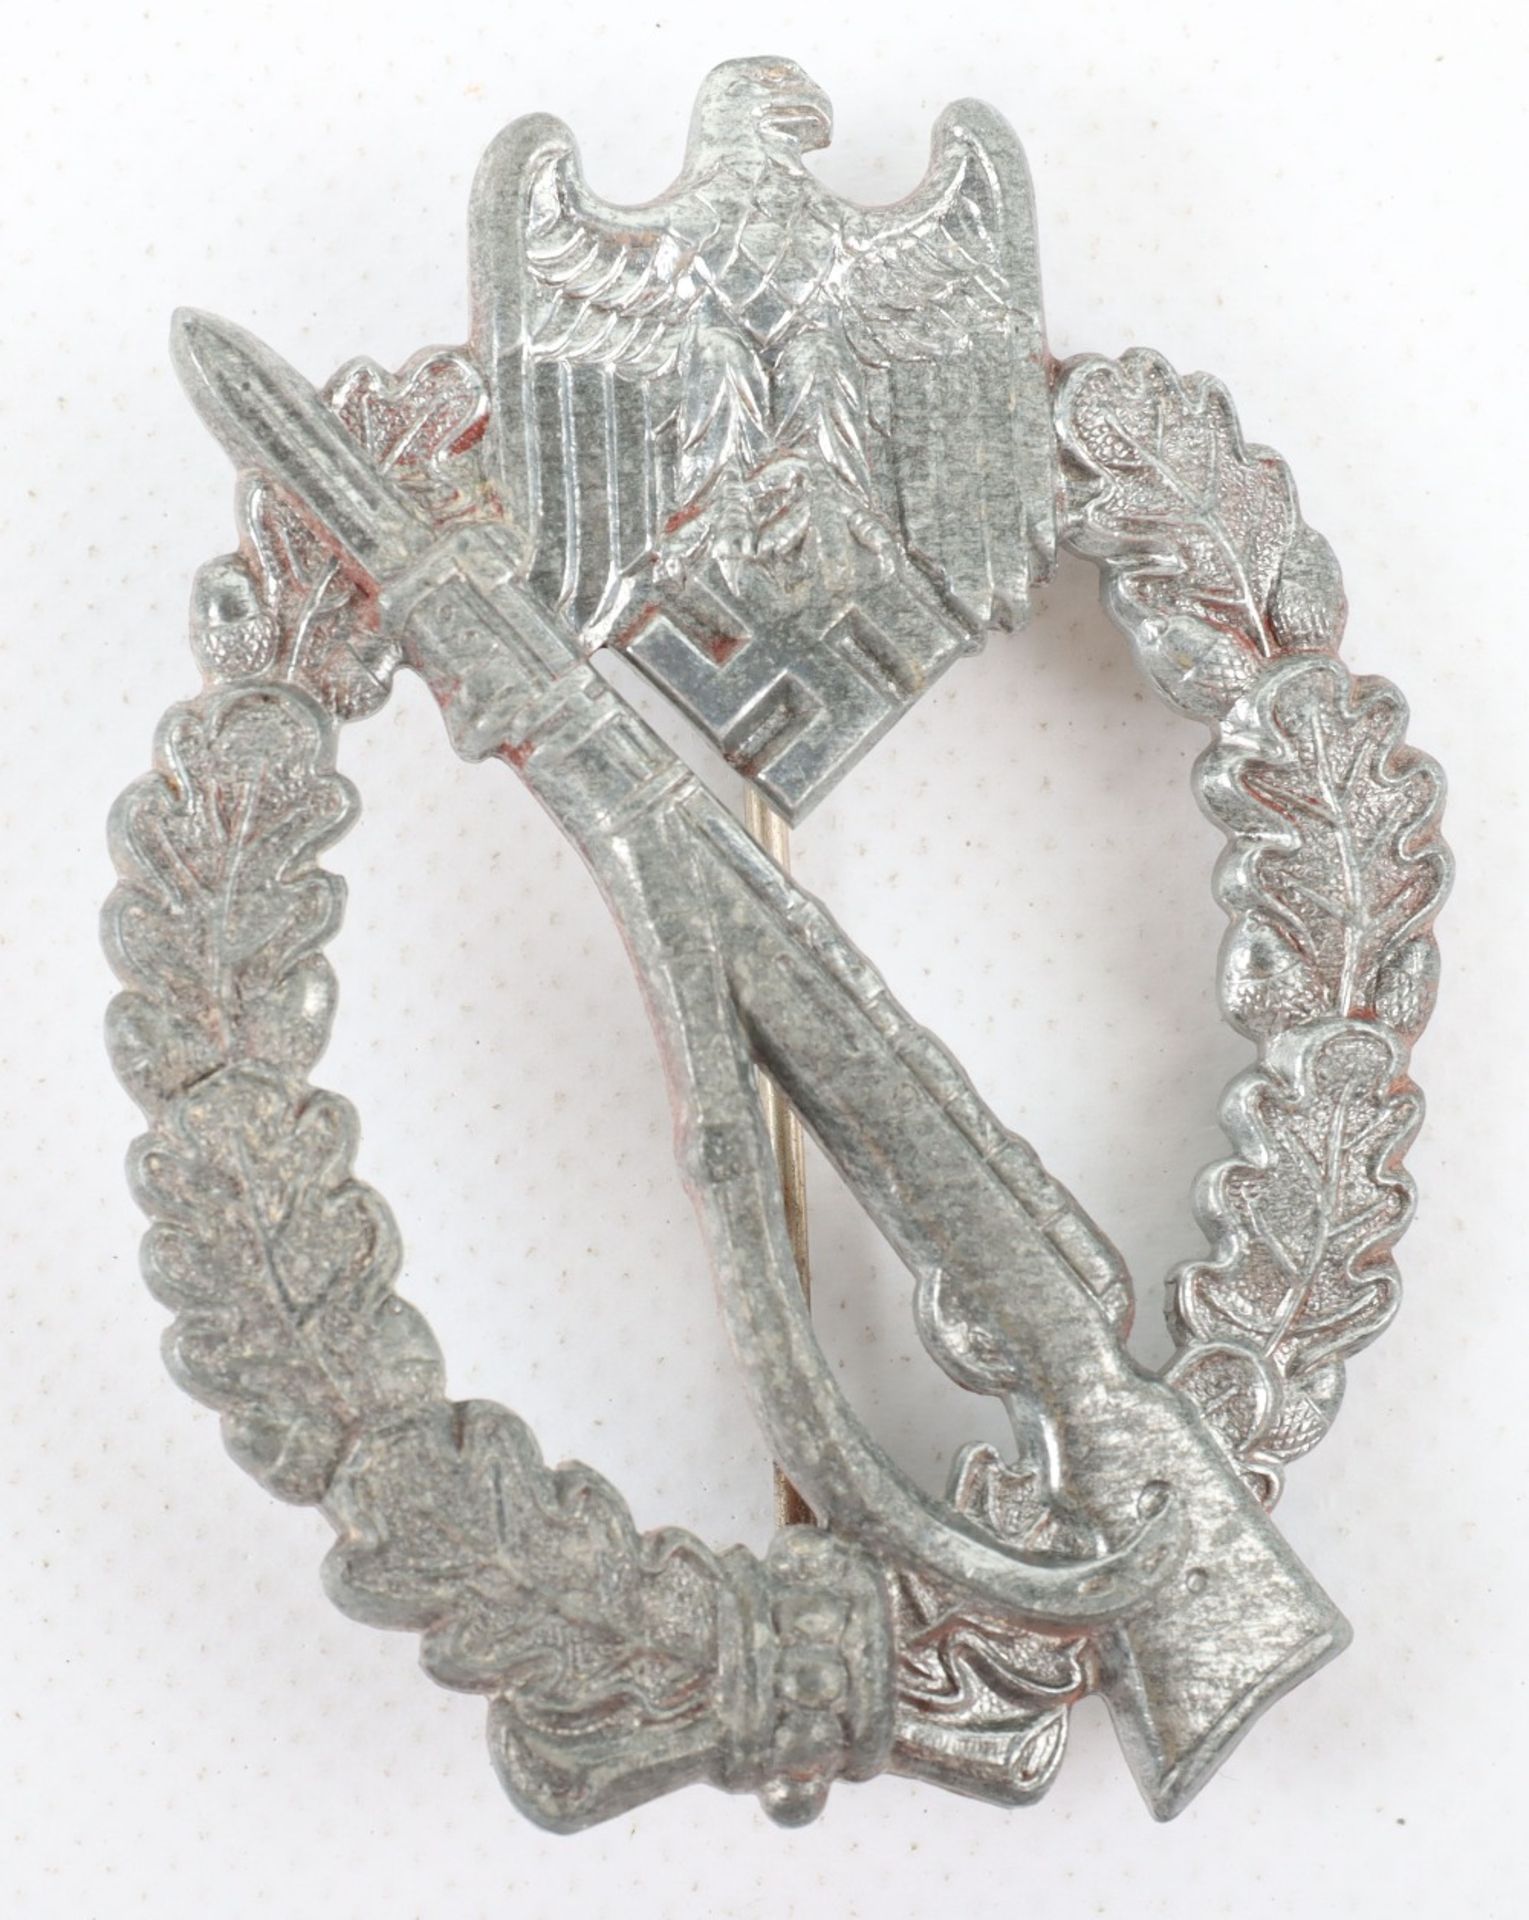 WW2 German Army / Waffen-SS Infantry Assault Badge in Silver